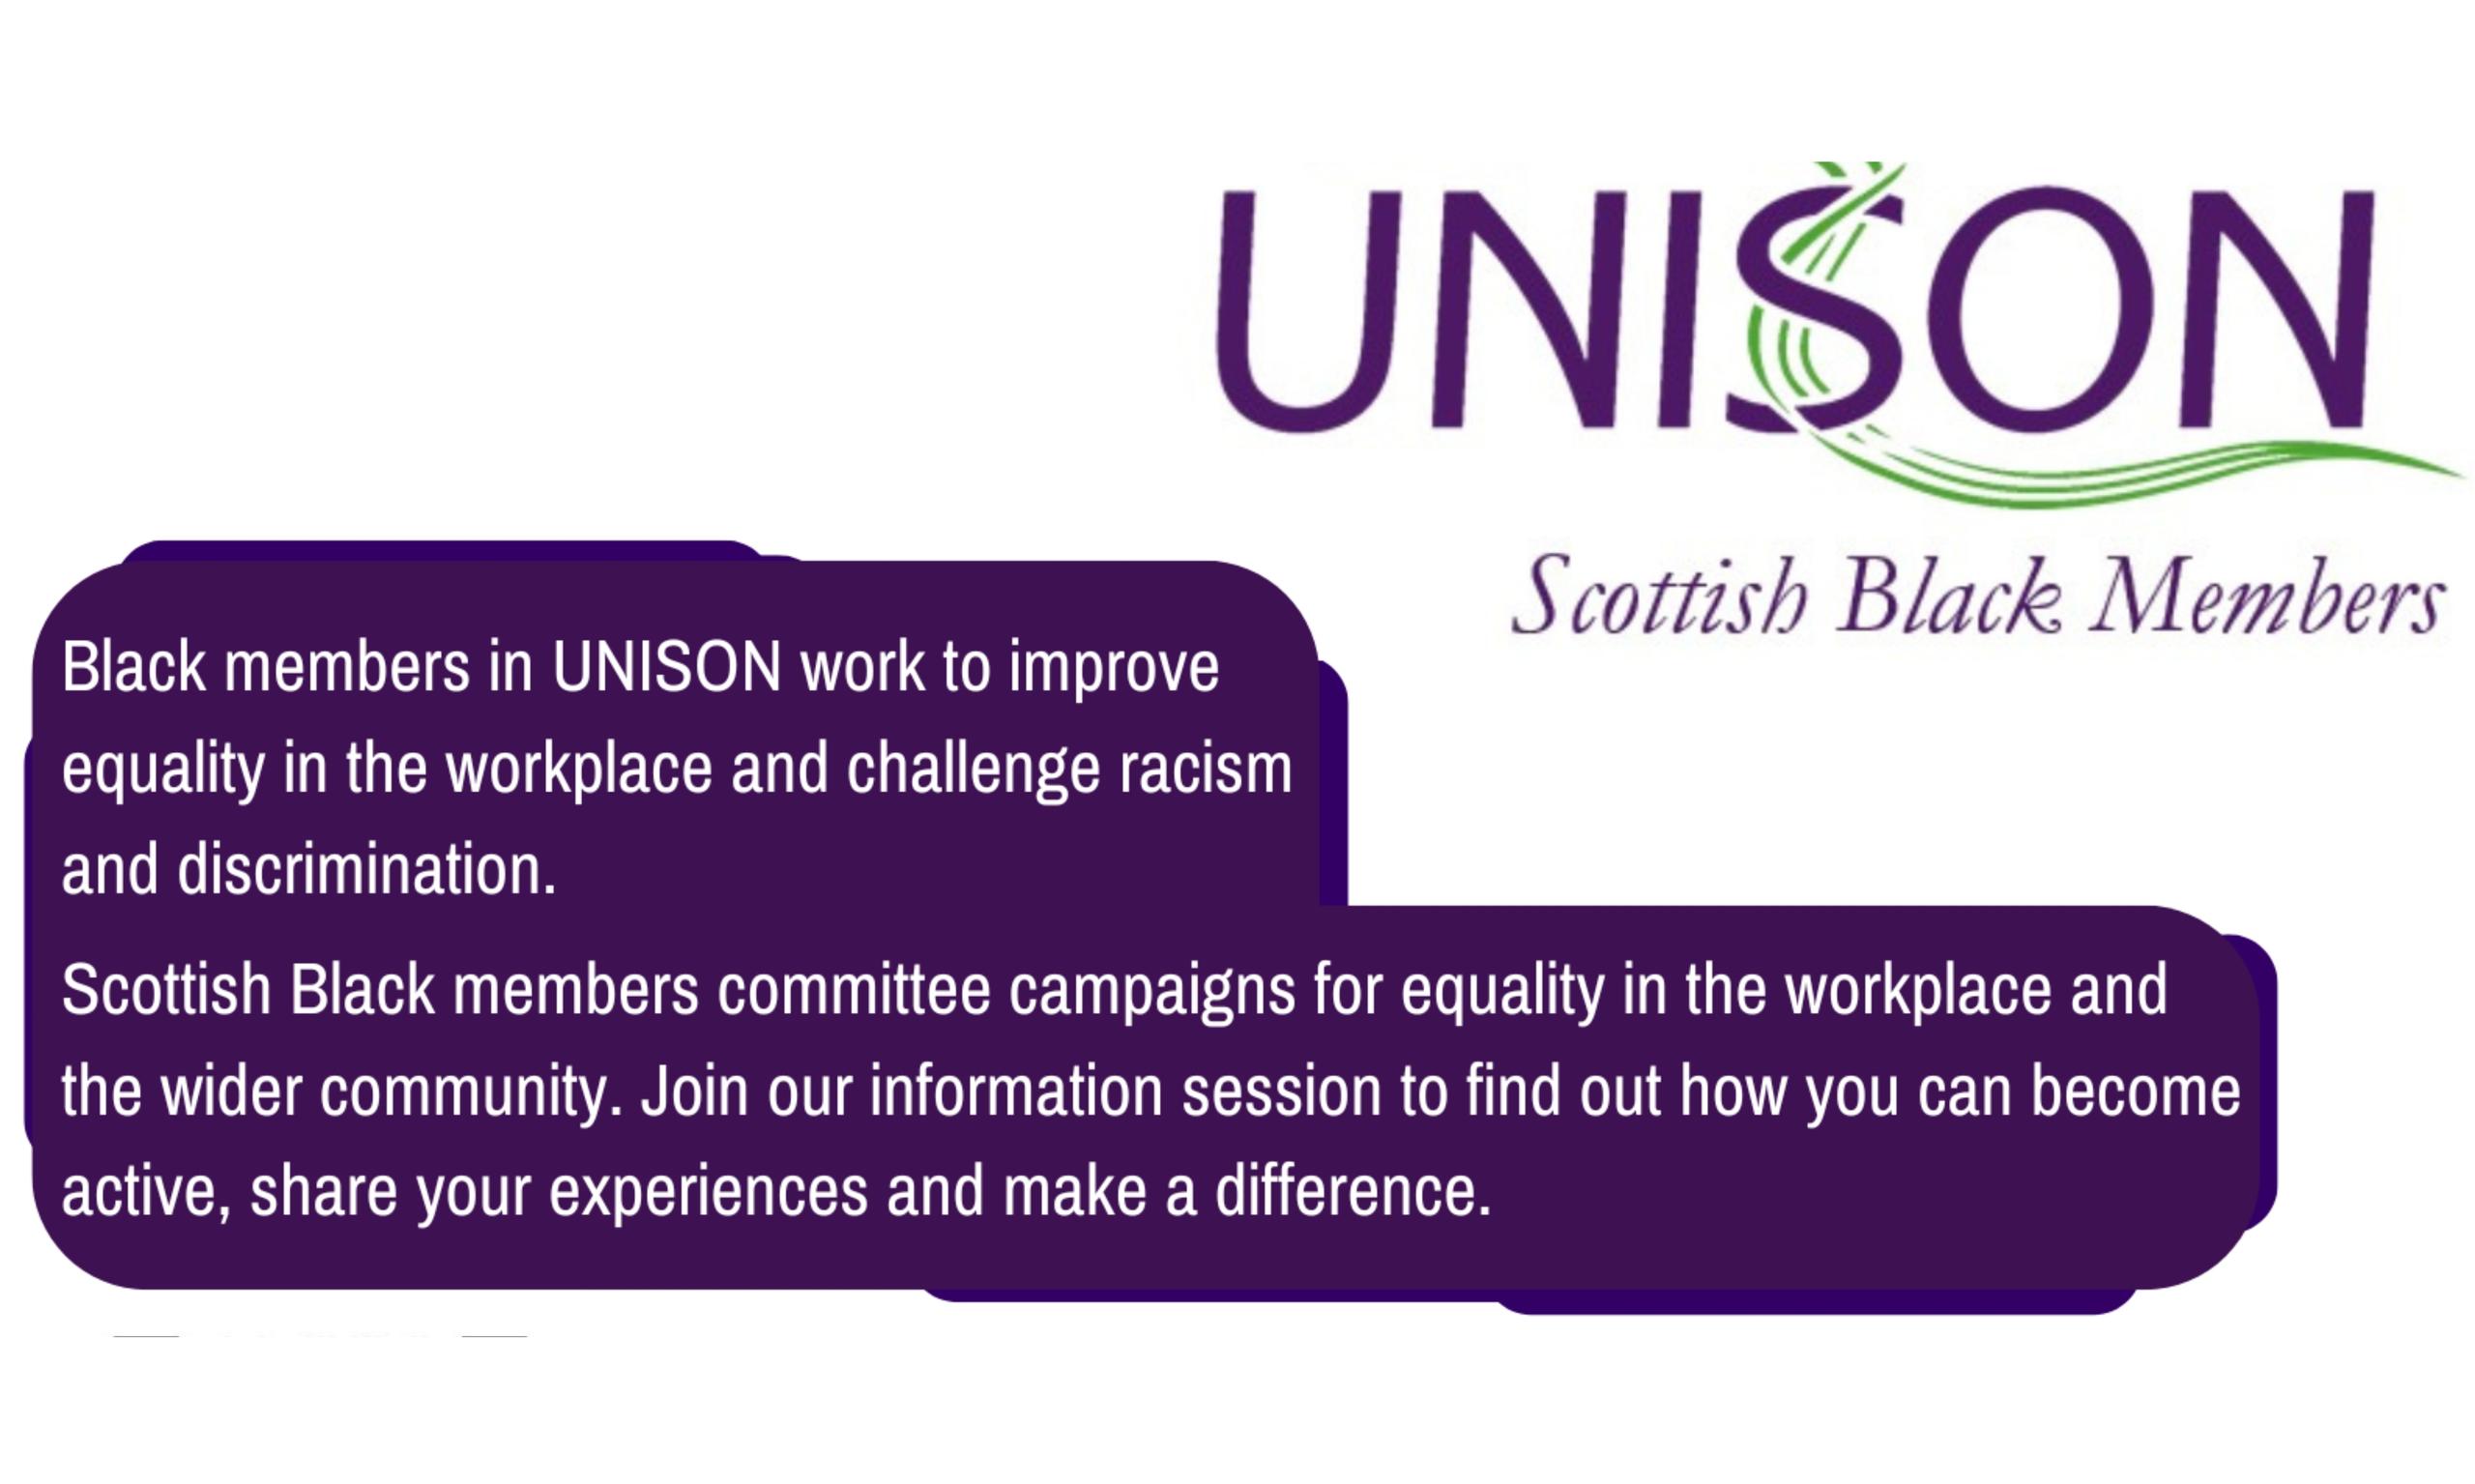 Tackling Racism and Promoting Equality with UNISON